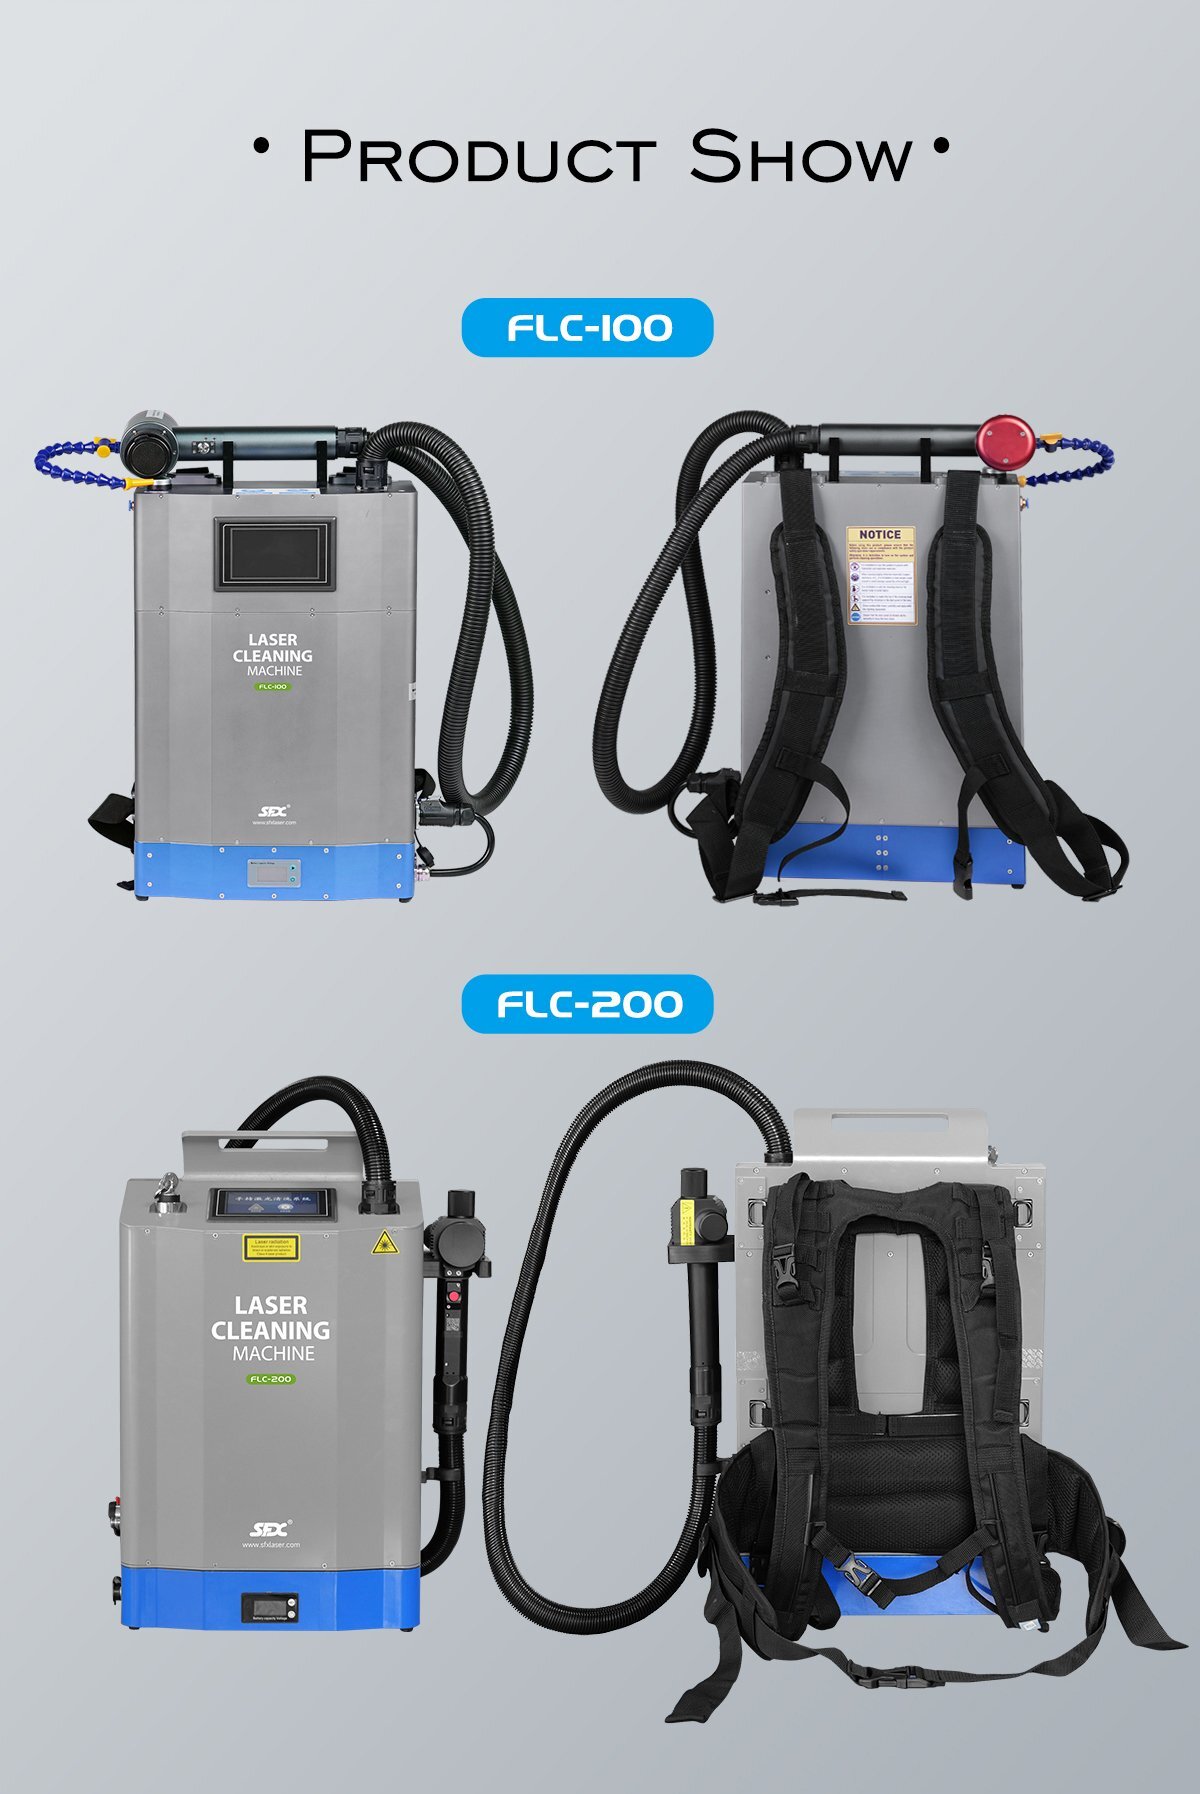 SFX 100watt Pulsed Backpack Laser Cleaning Machine with Rechargeable Battery for Remove Rust Coating Paint Easily With Comfortable Back Frame SFX 100W Rechargeable Pulsed Backpack Fiber Laser Cleaner Rust Removal Graffiti Cleaning portable backpack pulse laser cleaning machine rust removing,small size and lightweight laser cleanner 100watt,fiber laser cleaning machine rechargeable,SFX laser,sfx portable fiber laser cleaning machine machine,backpack laser cleaner for rust removal,laser rust removal machine for sale,laser cleaning machine 100w backpack type,battery laser cleaning machine,portable handheld laser cleaning machine,hand held laser cleaning machine for rust removal